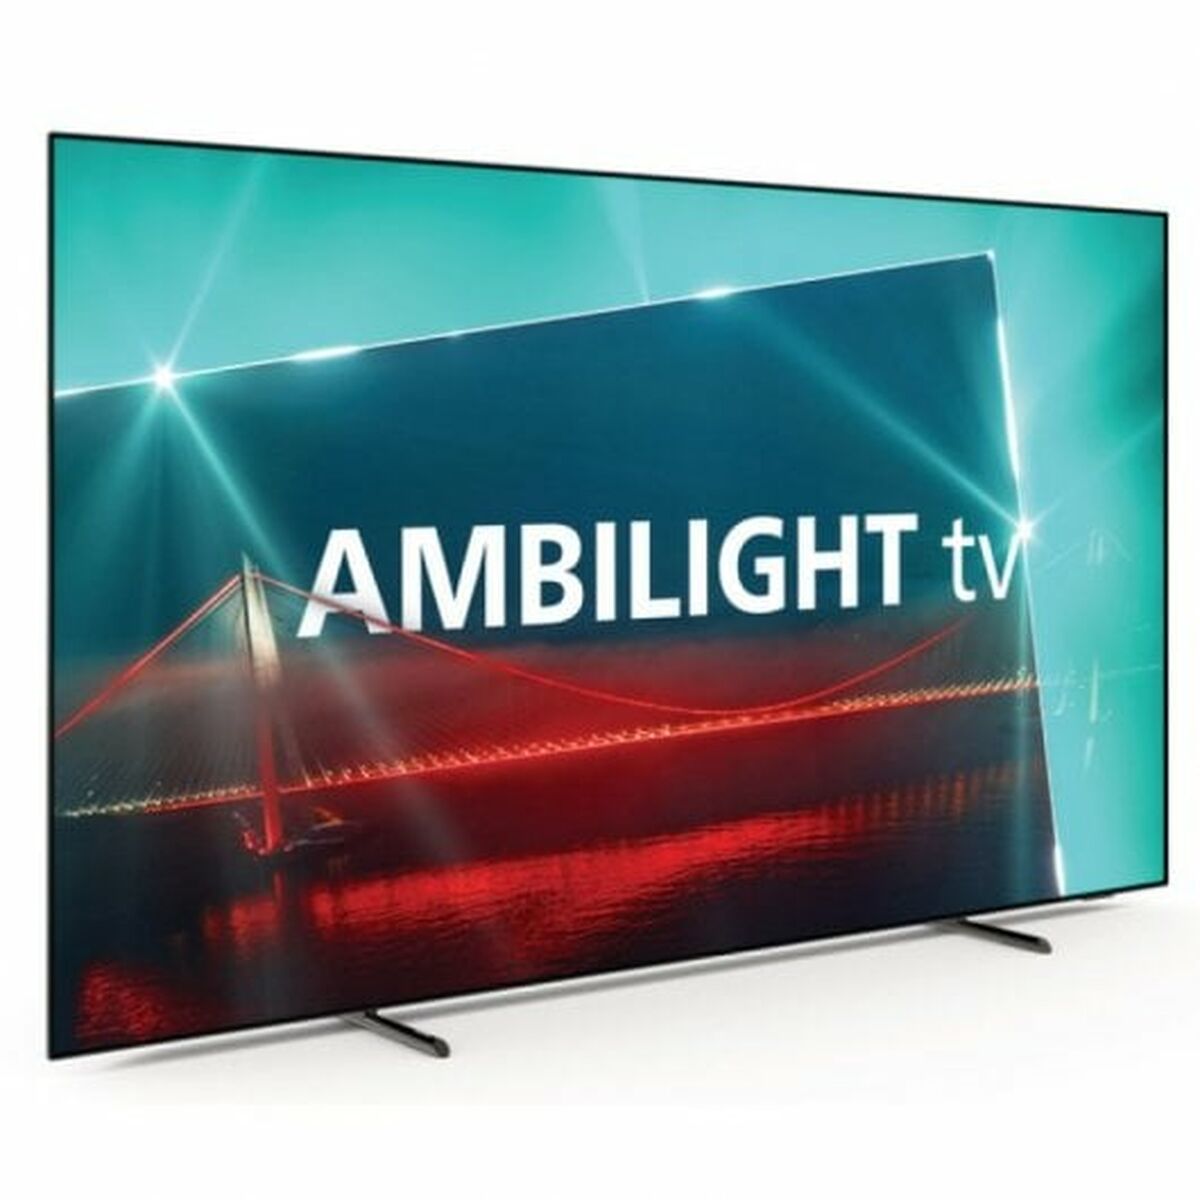 Smart TV Philips 65OLED718/12 65" 4K Ultra HD OLED, Philips, Electronics, TV, Video and home cinema, smart-tv-philips-65oled718-12-65-4k-ultra-hd-oled, Brand_Philips, category-reference-2609, category-reference-2625, category-reference-2931, category-reference-t-18805, category-reference-t-19653, cinema and television, Condition_NEW, entertainment, Price_+ 1000, RiotNook